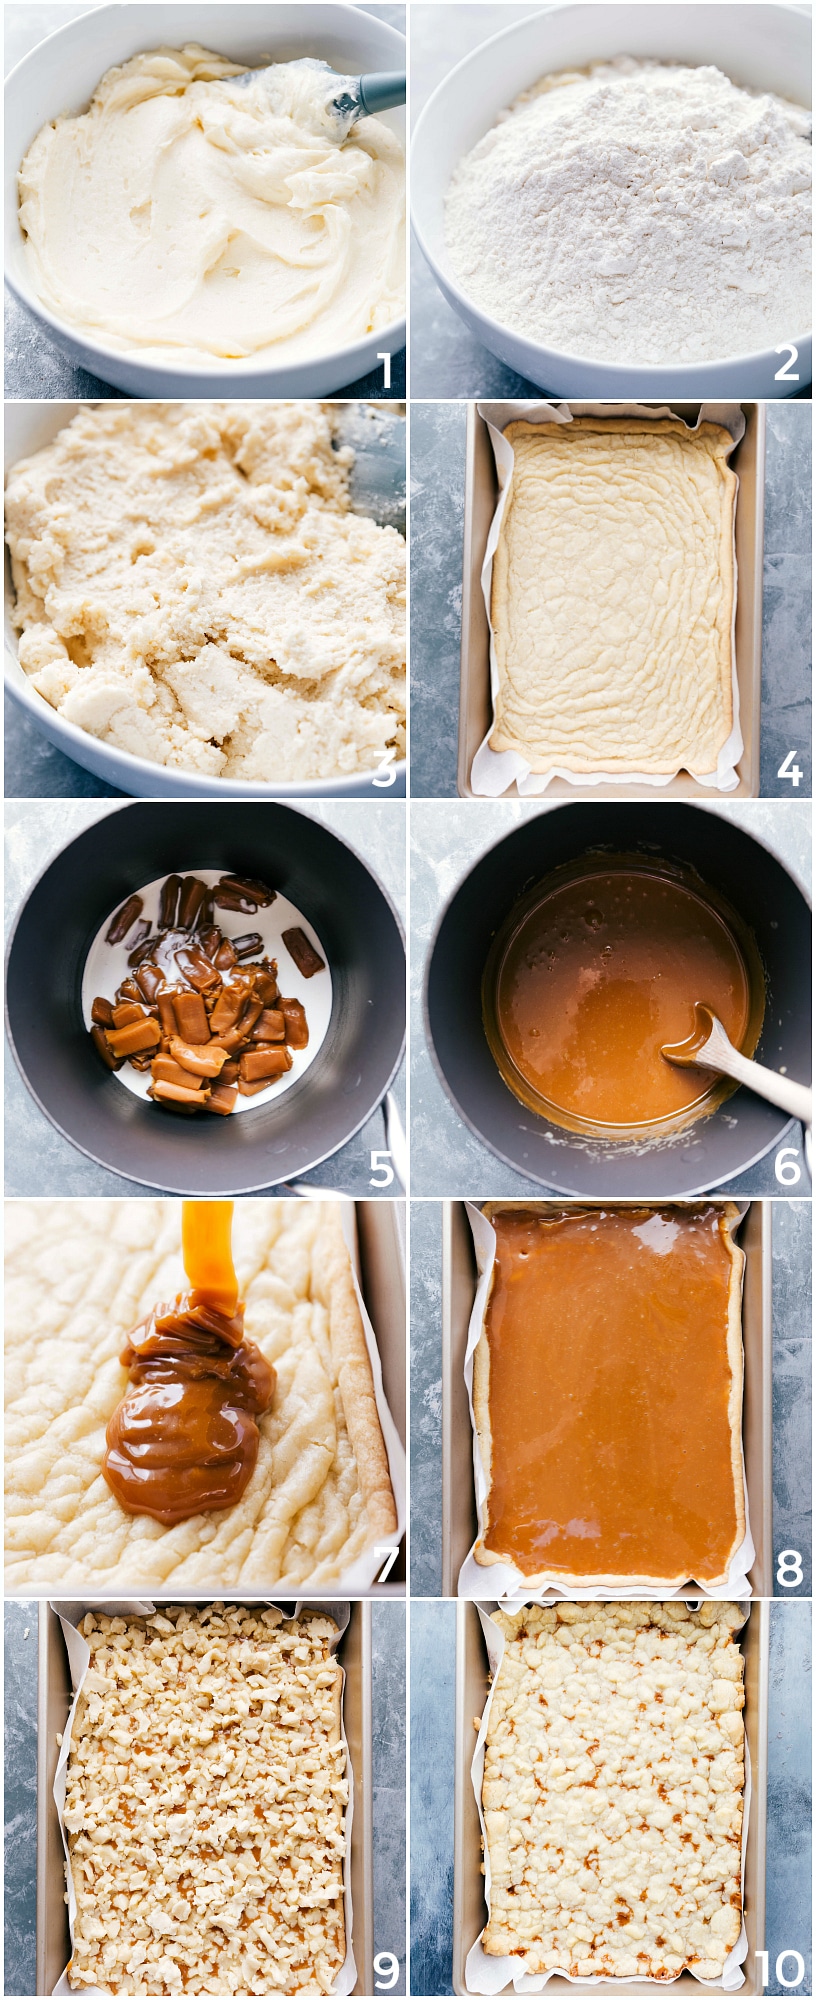 Making Caramel Cookie Bars from start to finish.